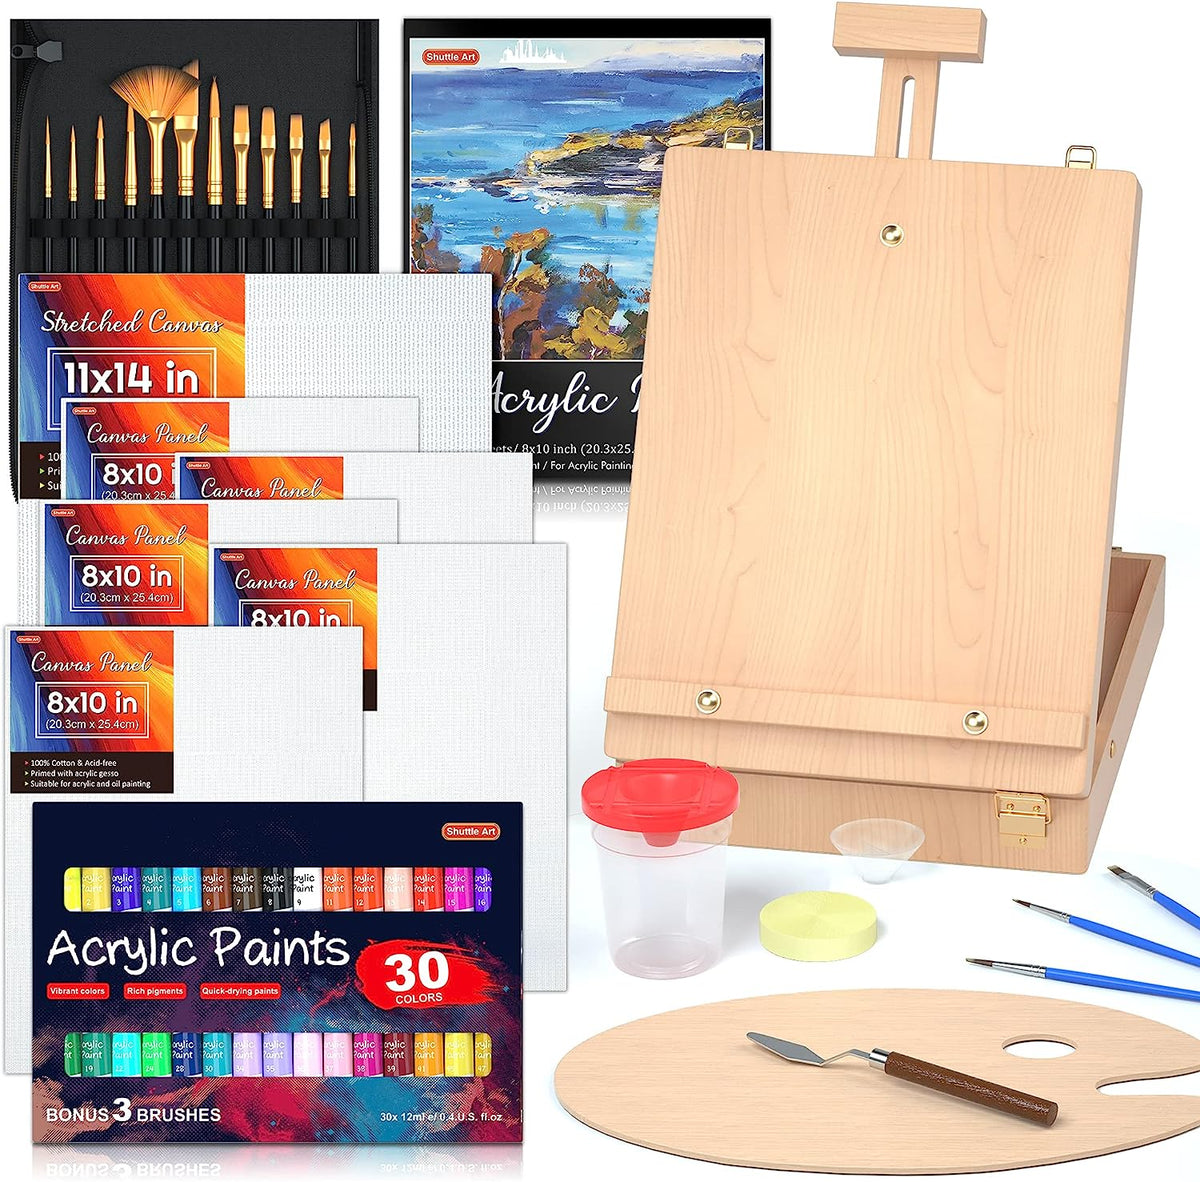 MMARTE 59pcs Acrylic Paint Set for Kids, Art Painting Supplies Kit with 24  Non-Toxic Paints, Tabletop Easel, Paint Brushes, Painting Pad, Canvas More